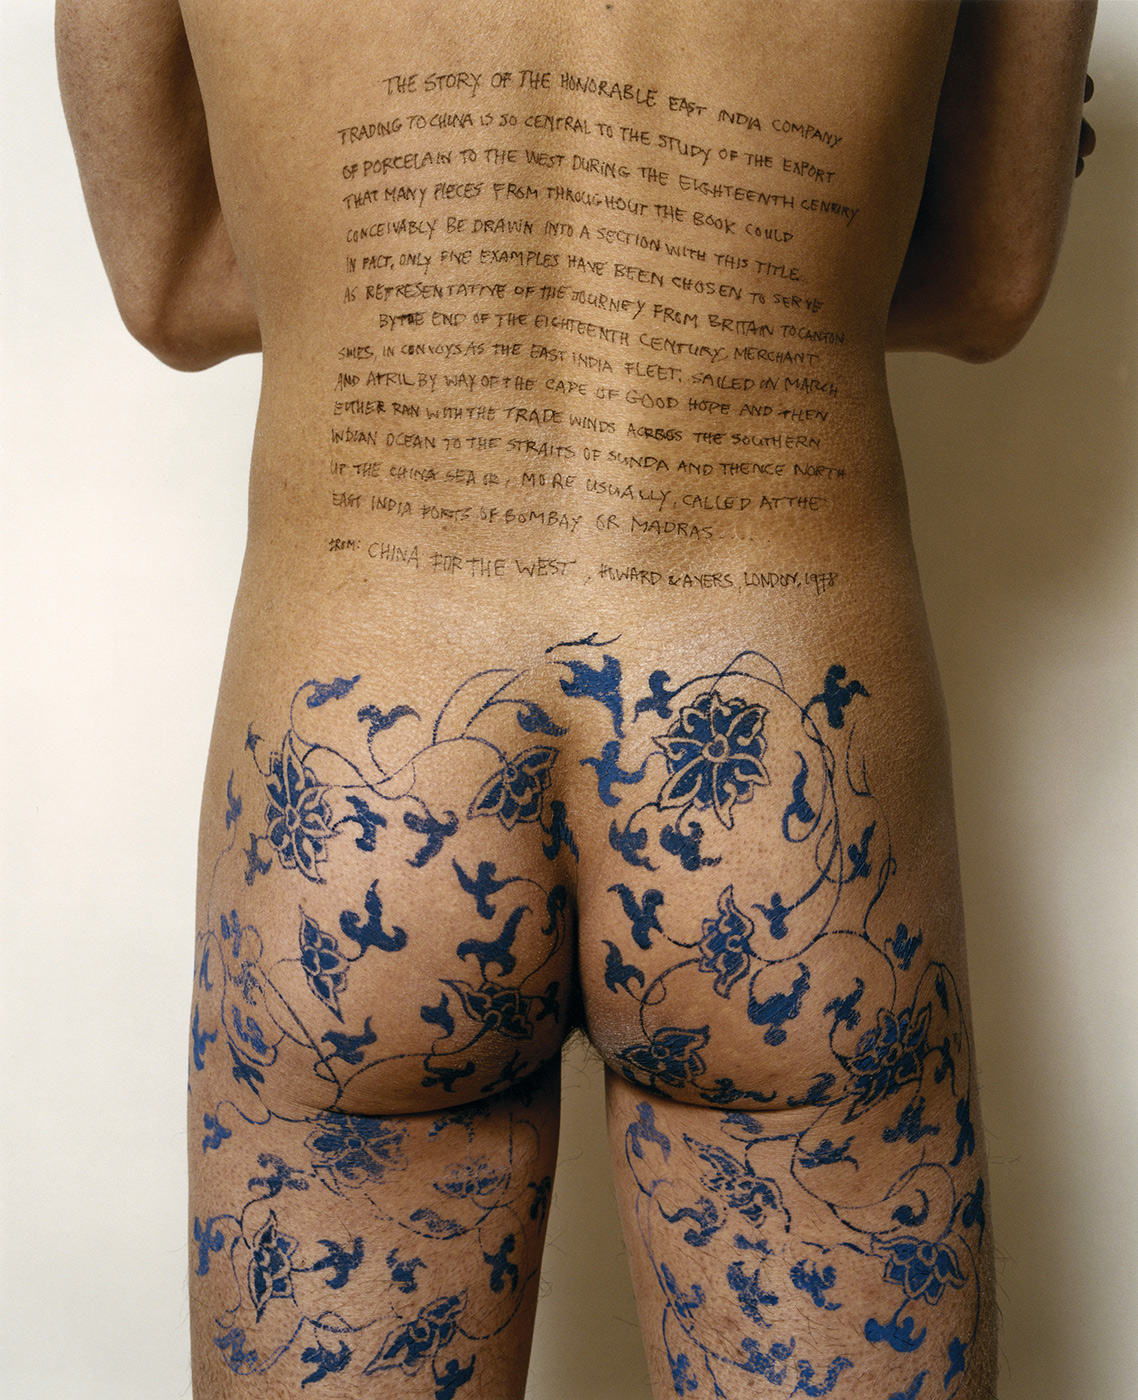 Haifeng Ni - Self-Portrait as Part of the Porcelain Export History 7 - Front hips, 1999-2001